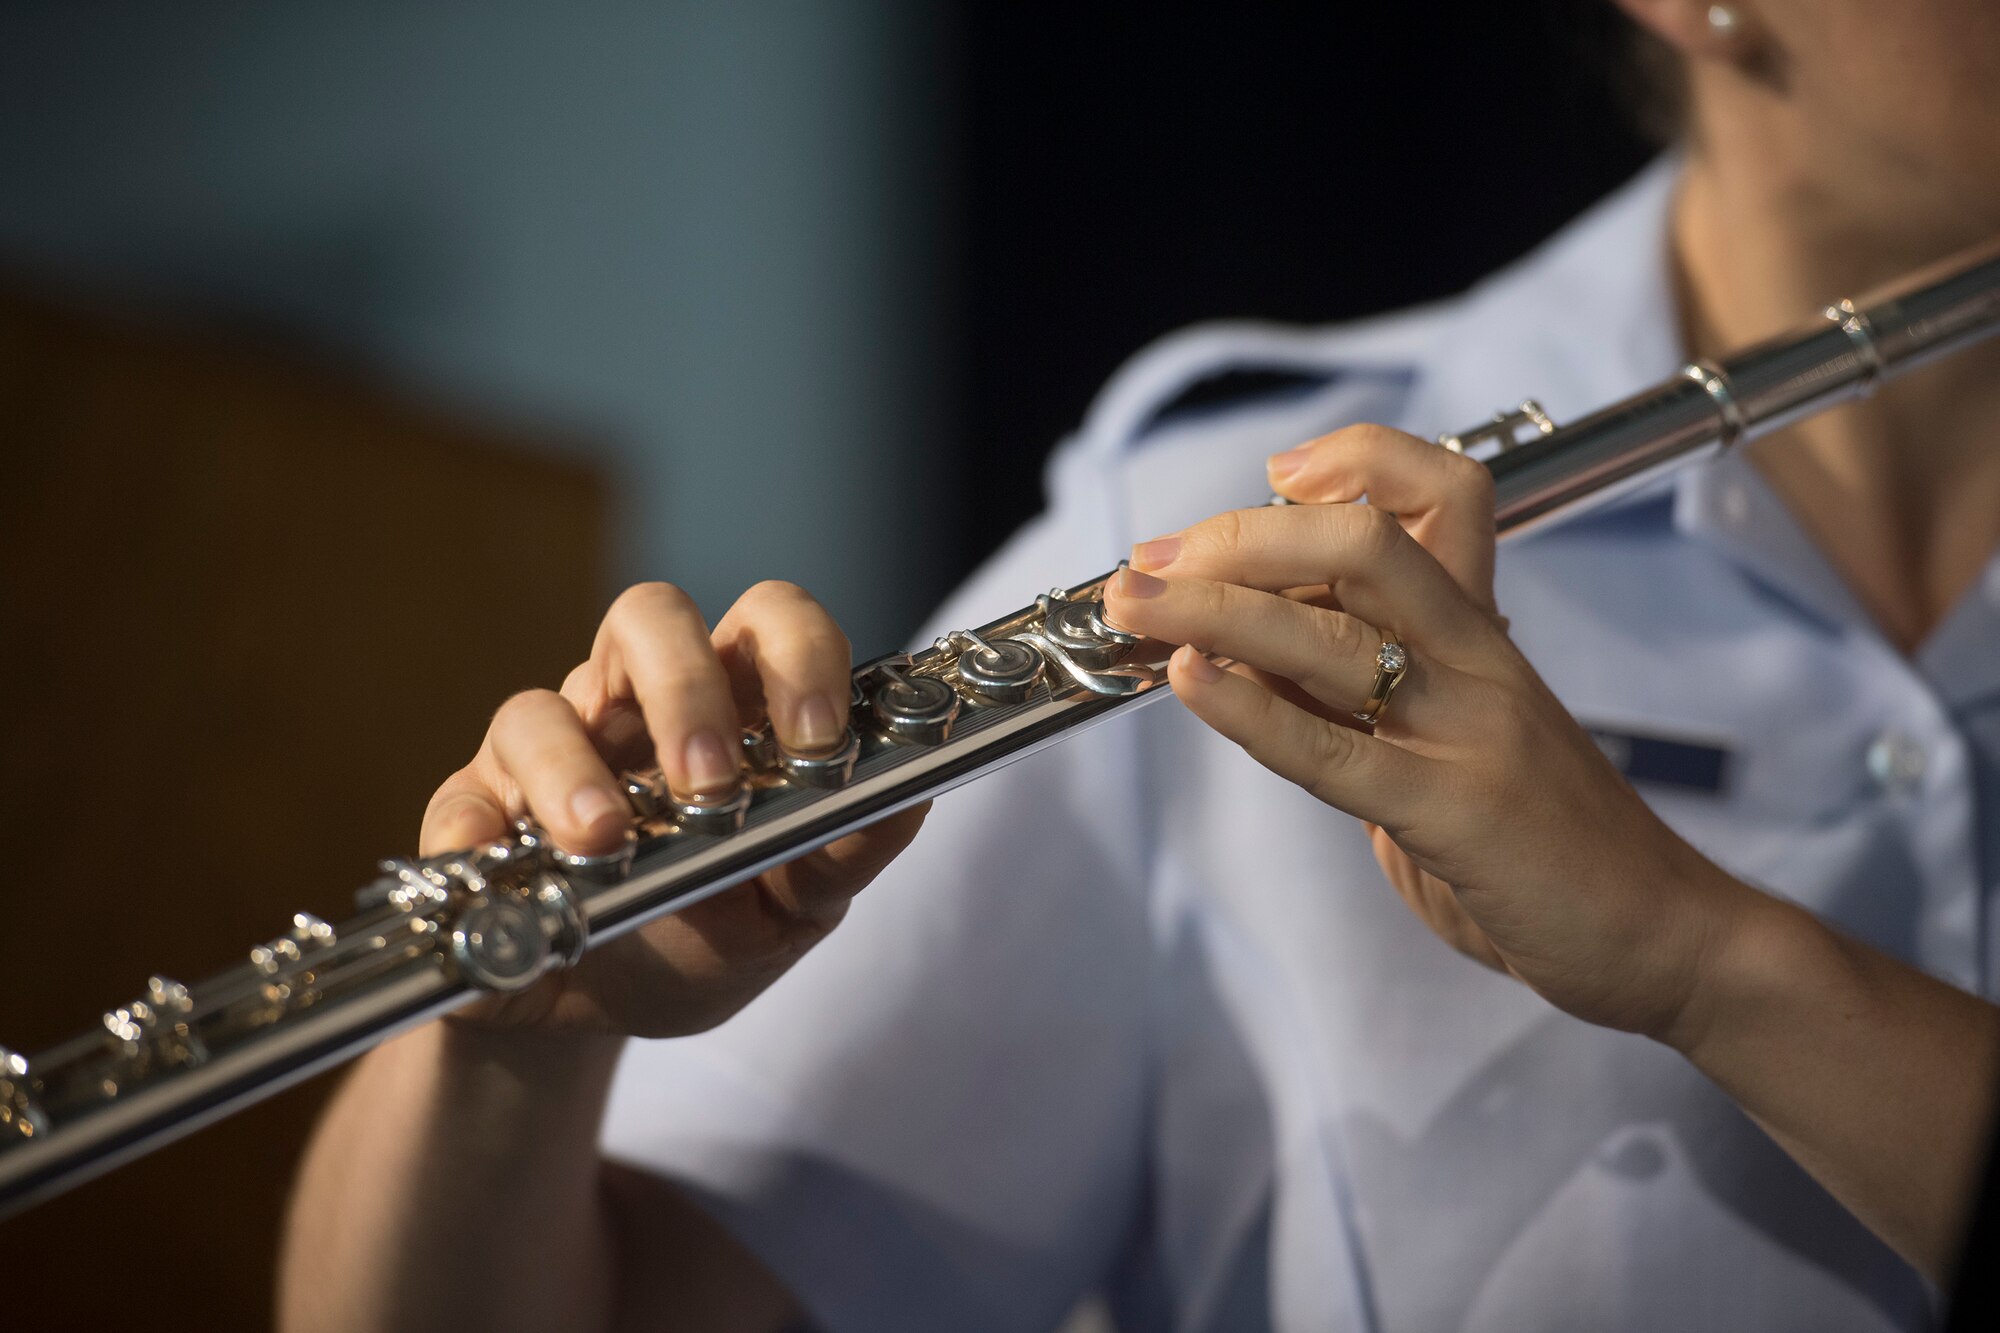 Airman 1st Class Andrea Murano, a flute player with the U.S. Air Force Heritage Winds, performs for veterans and community members June 6, 2019, in Mount Pleasant, S.C.